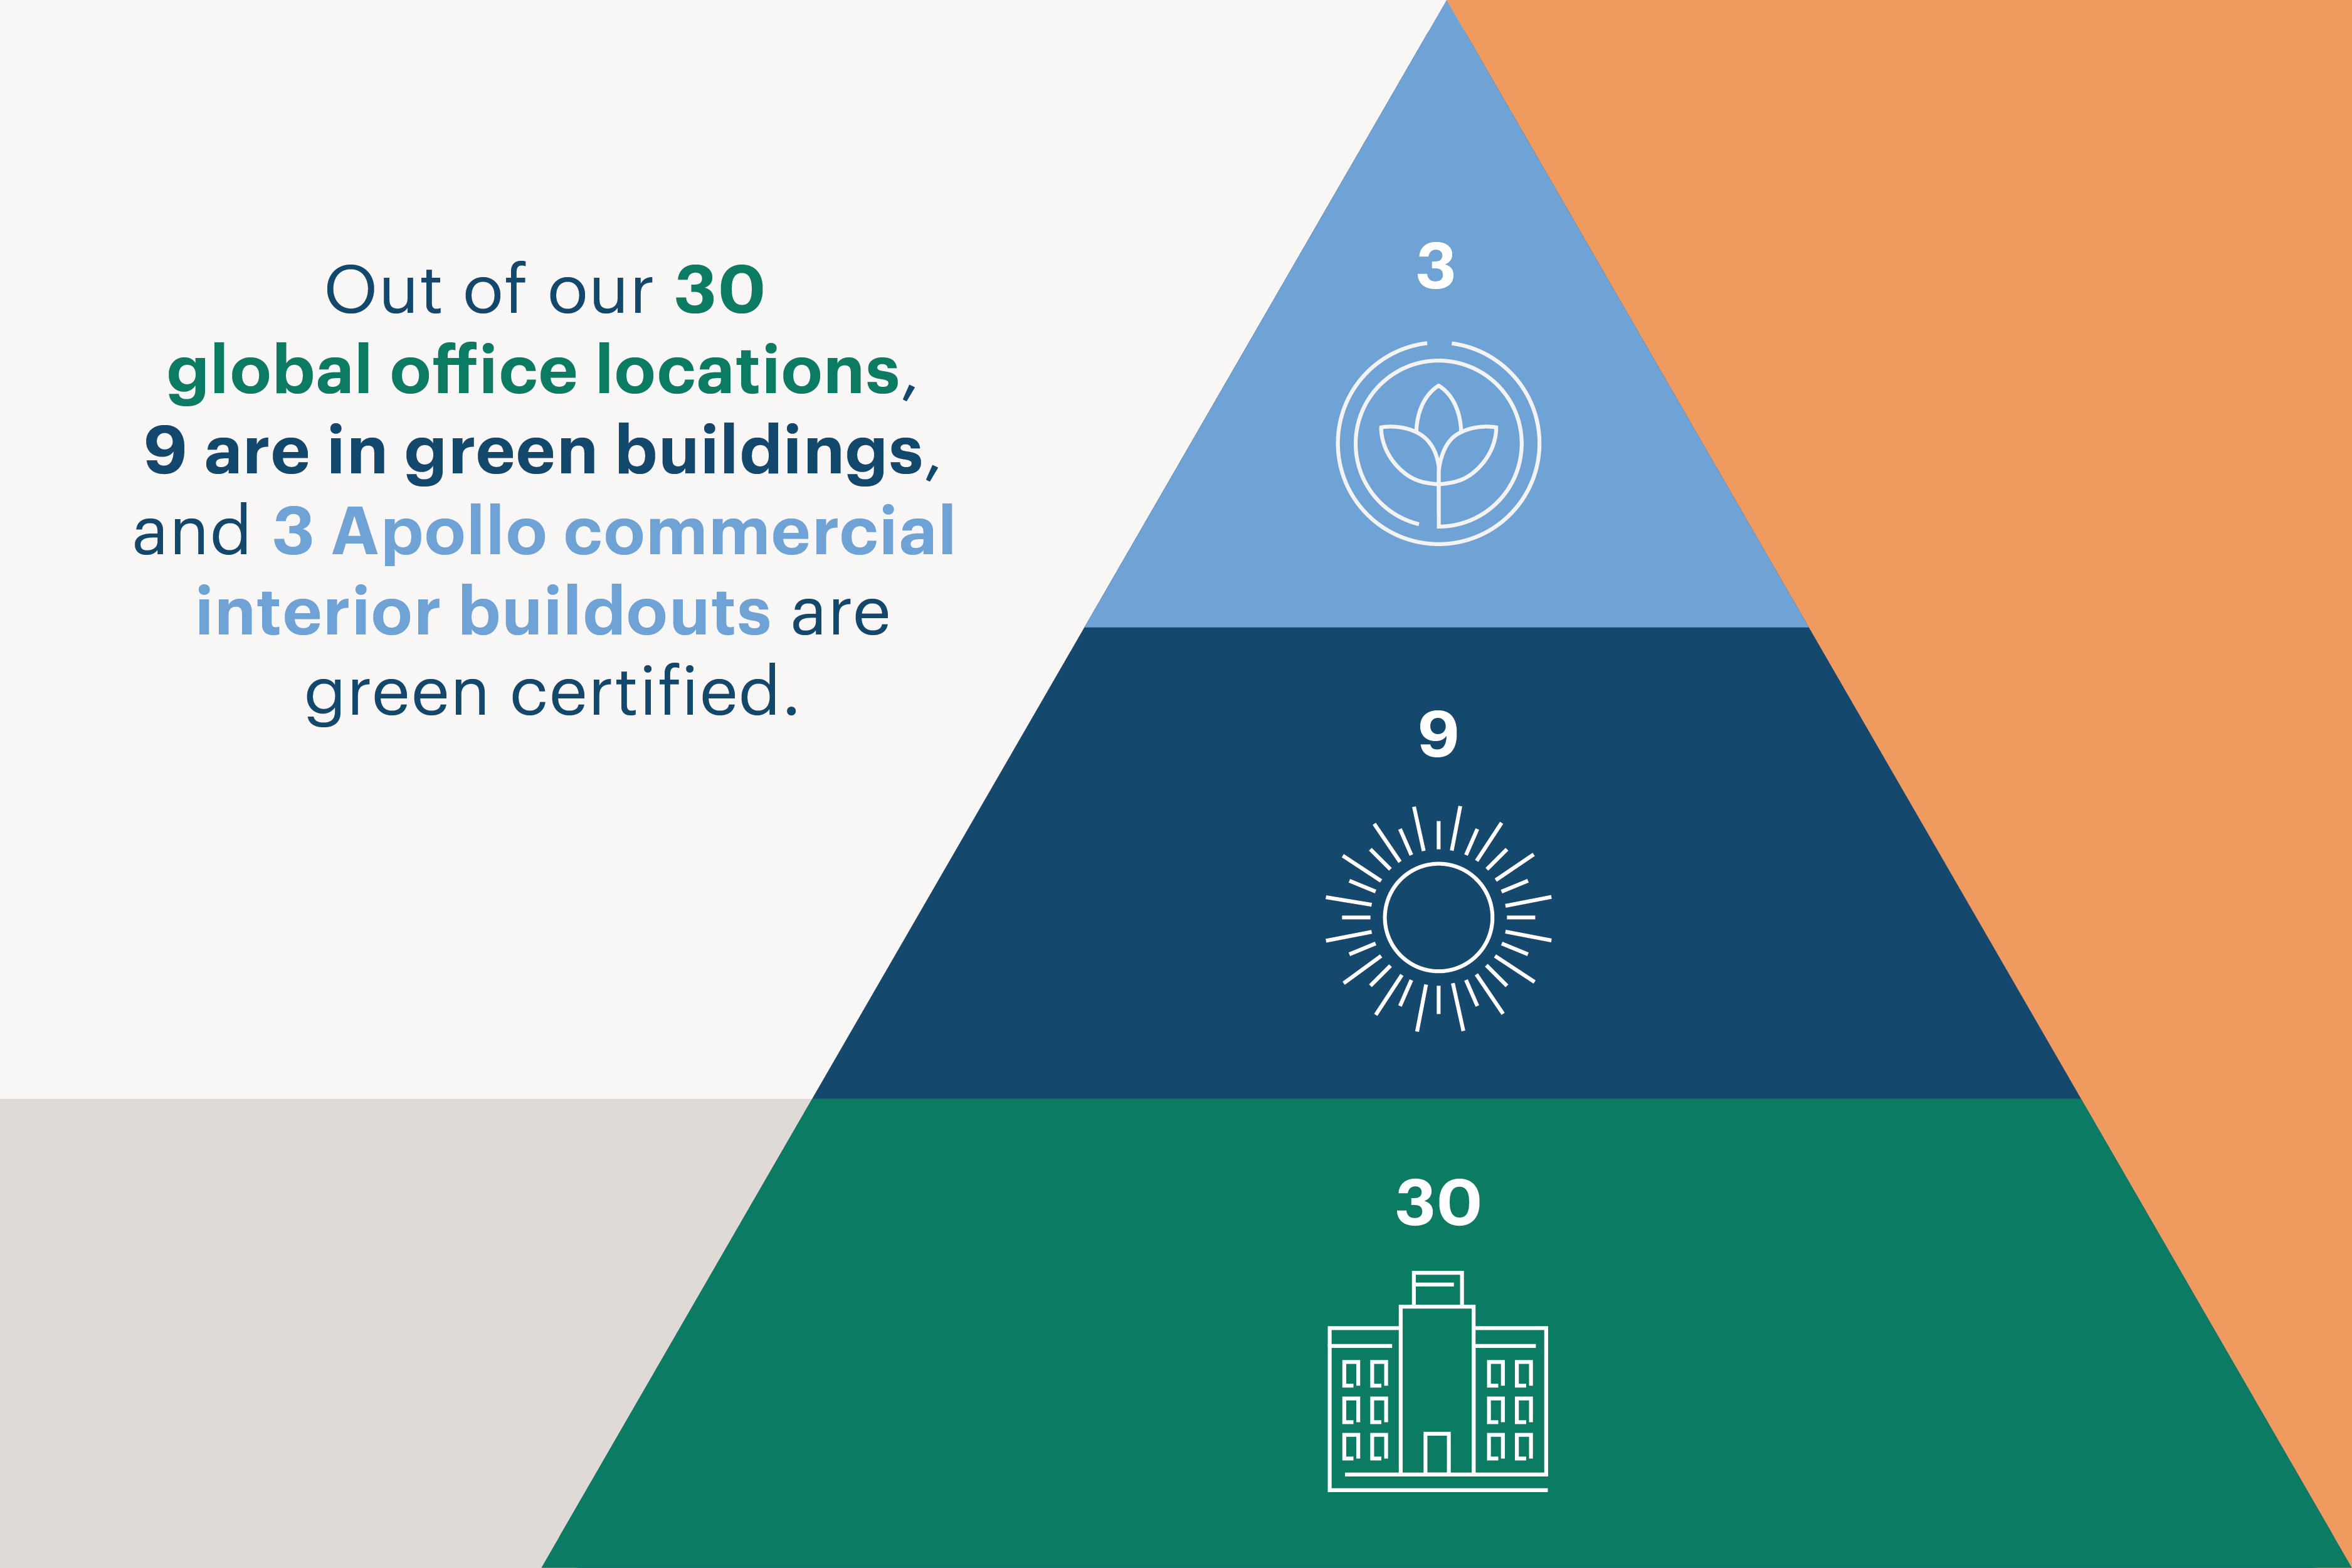 Out of our 30 global office buildings, 9 are in green buildings and 3 Apollo commercial interior buildings are green certified. 